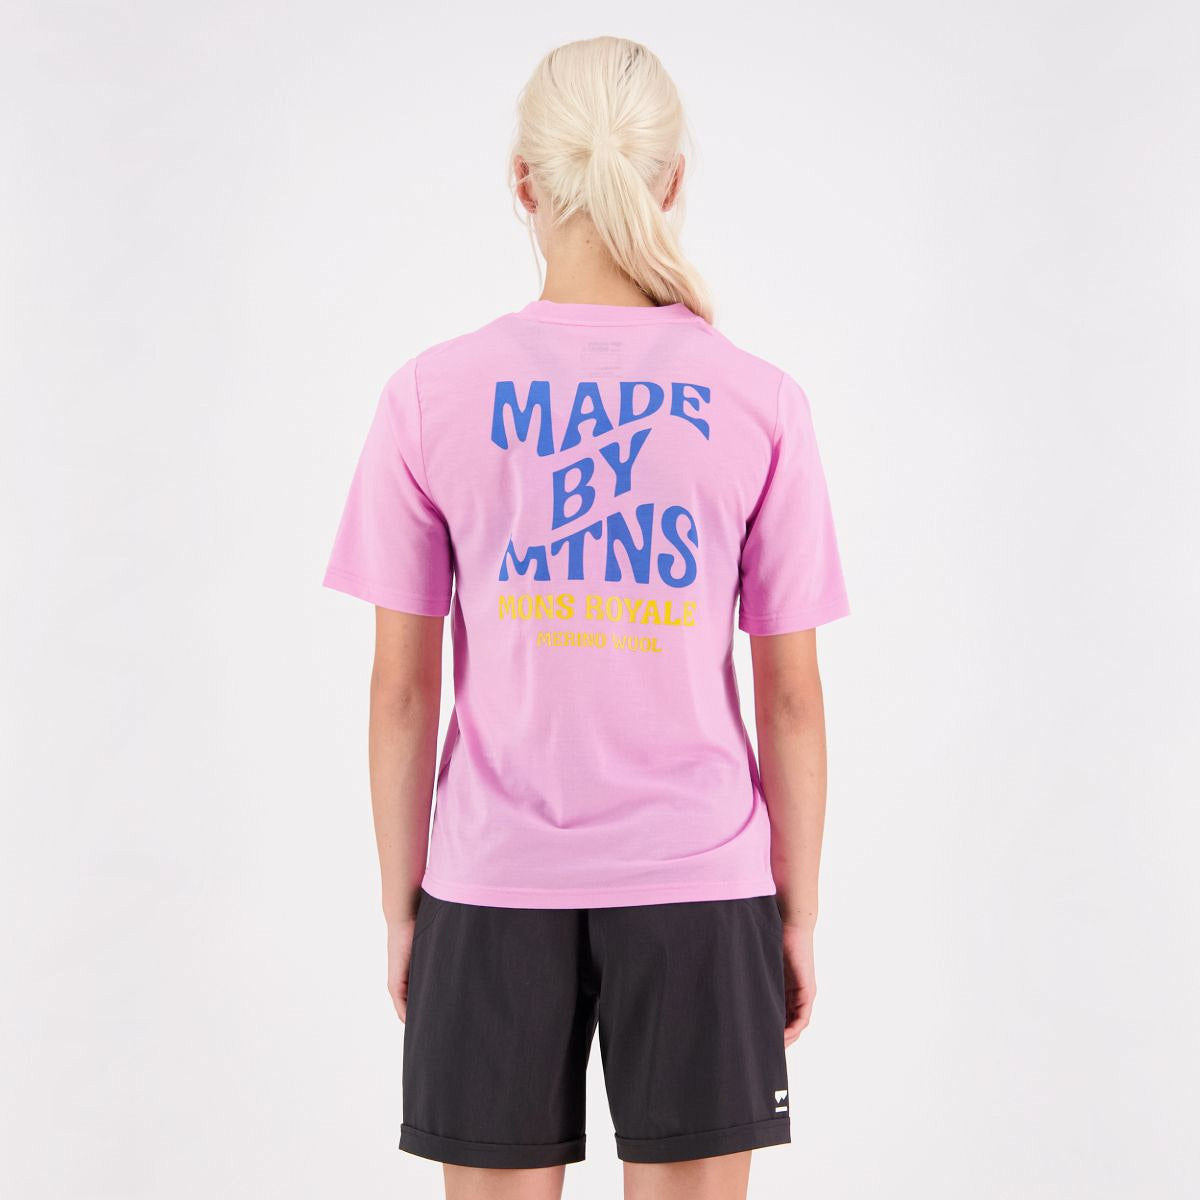 Mons Royale (Sample) - Women's Icon Relaxed Tee - Pop Pink